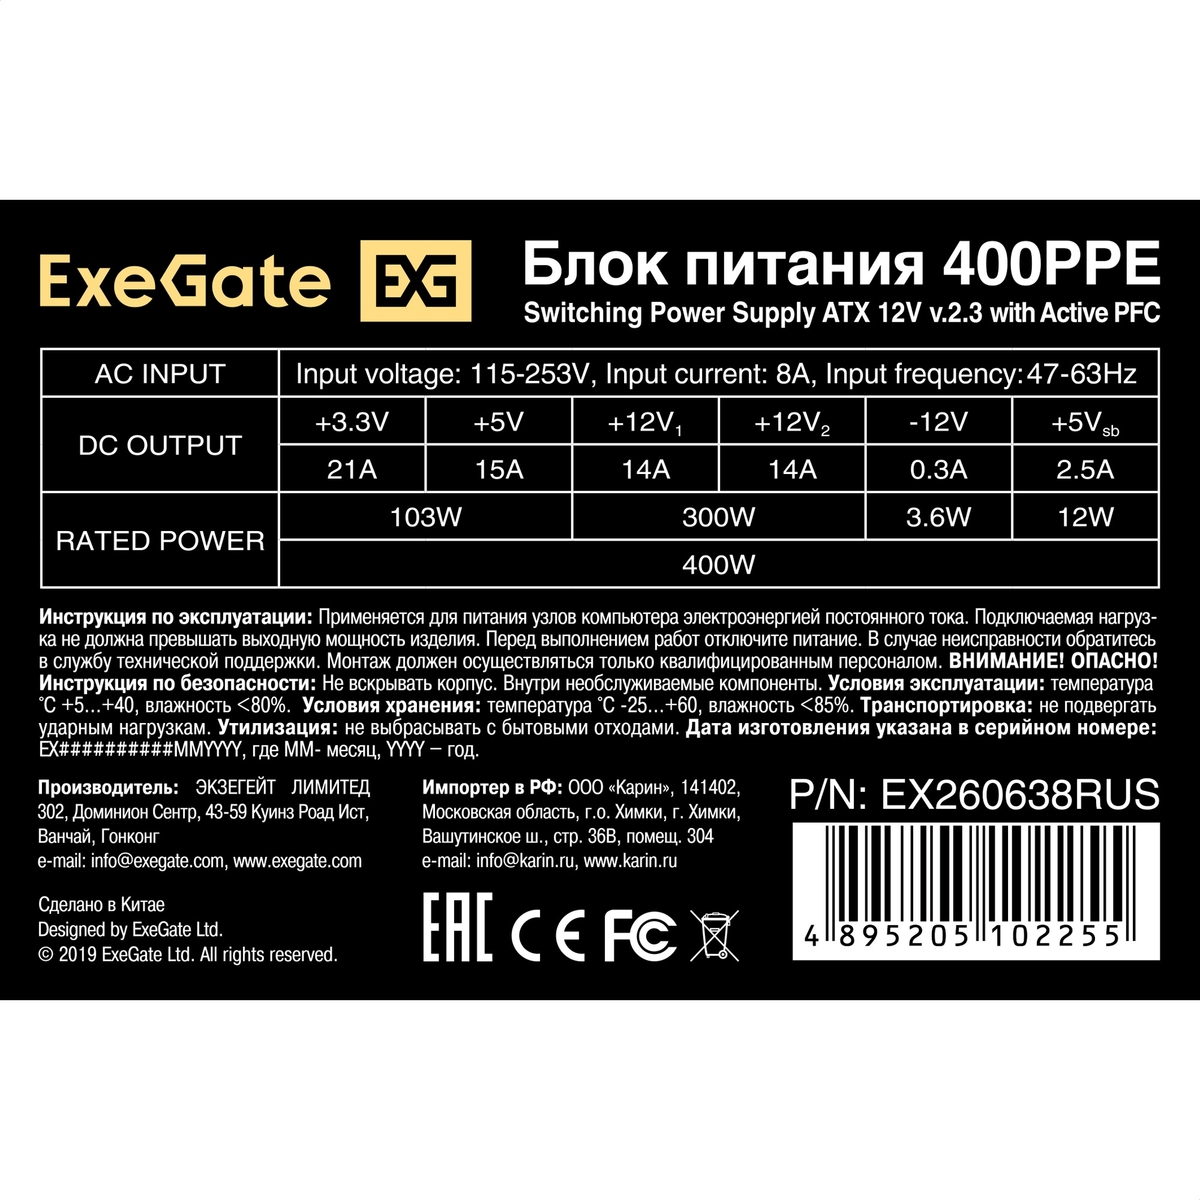  400W ExeGate 400PPE